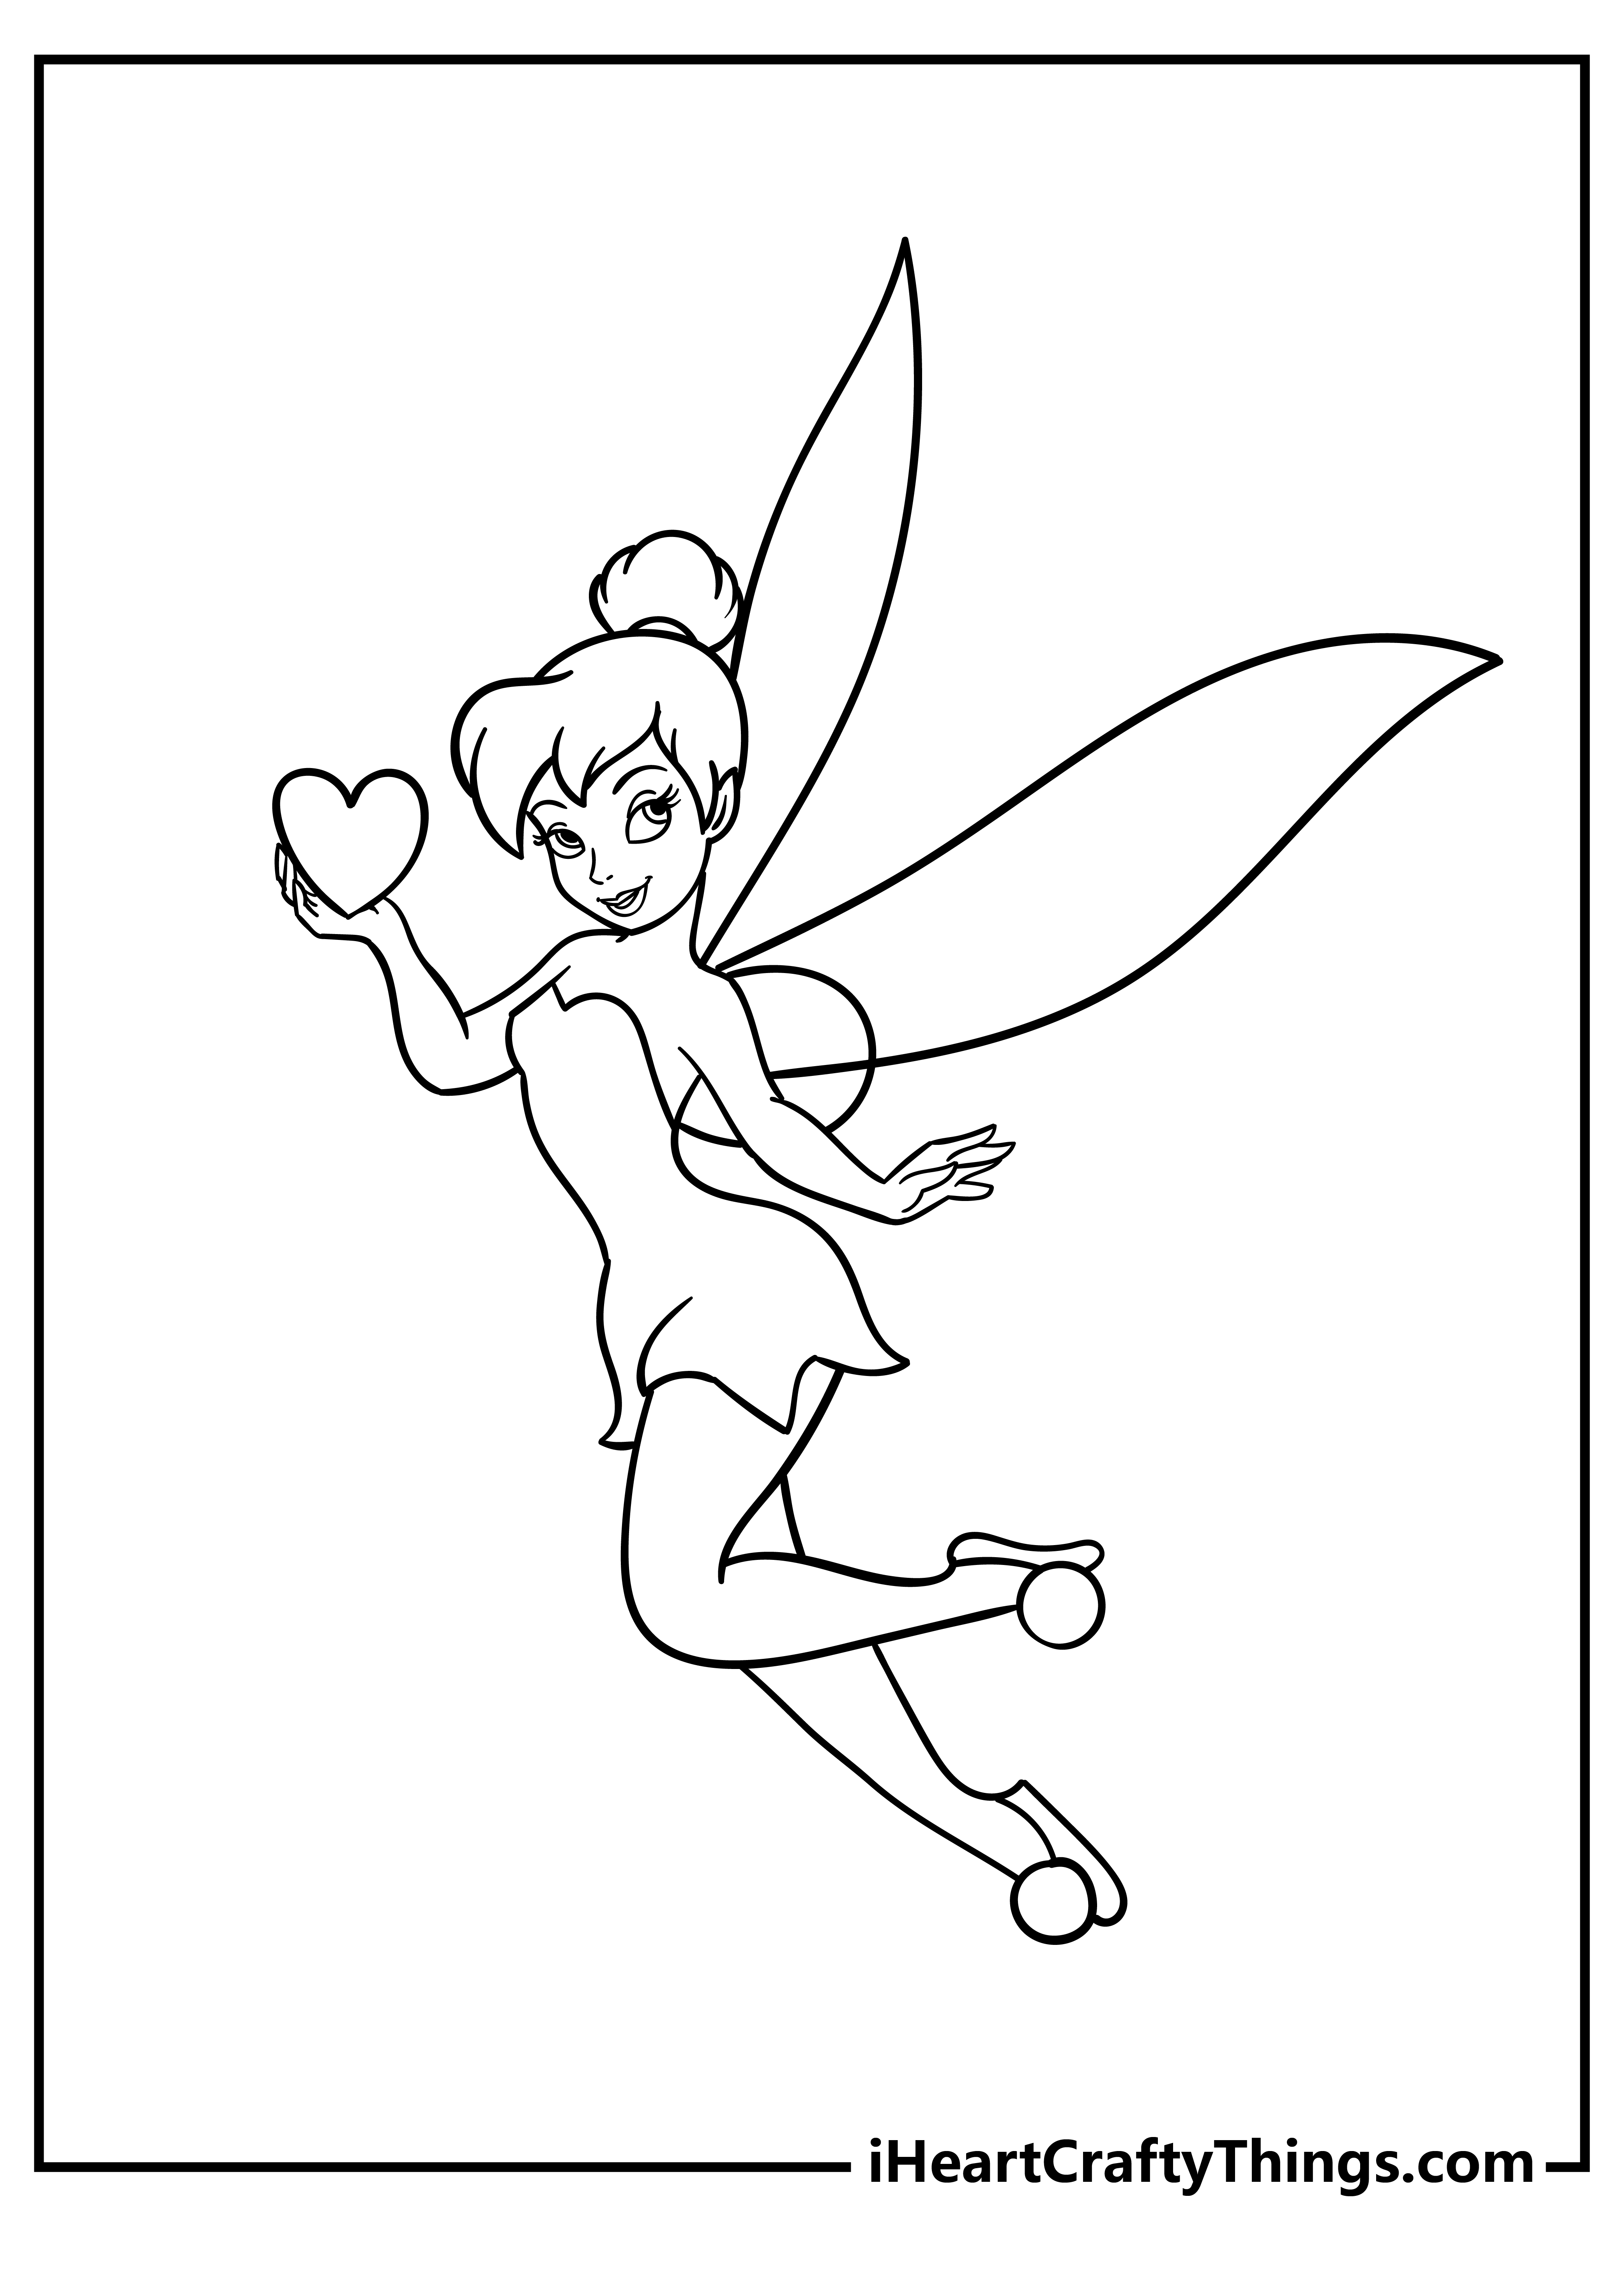 Tinkerbell coloring pages free printables